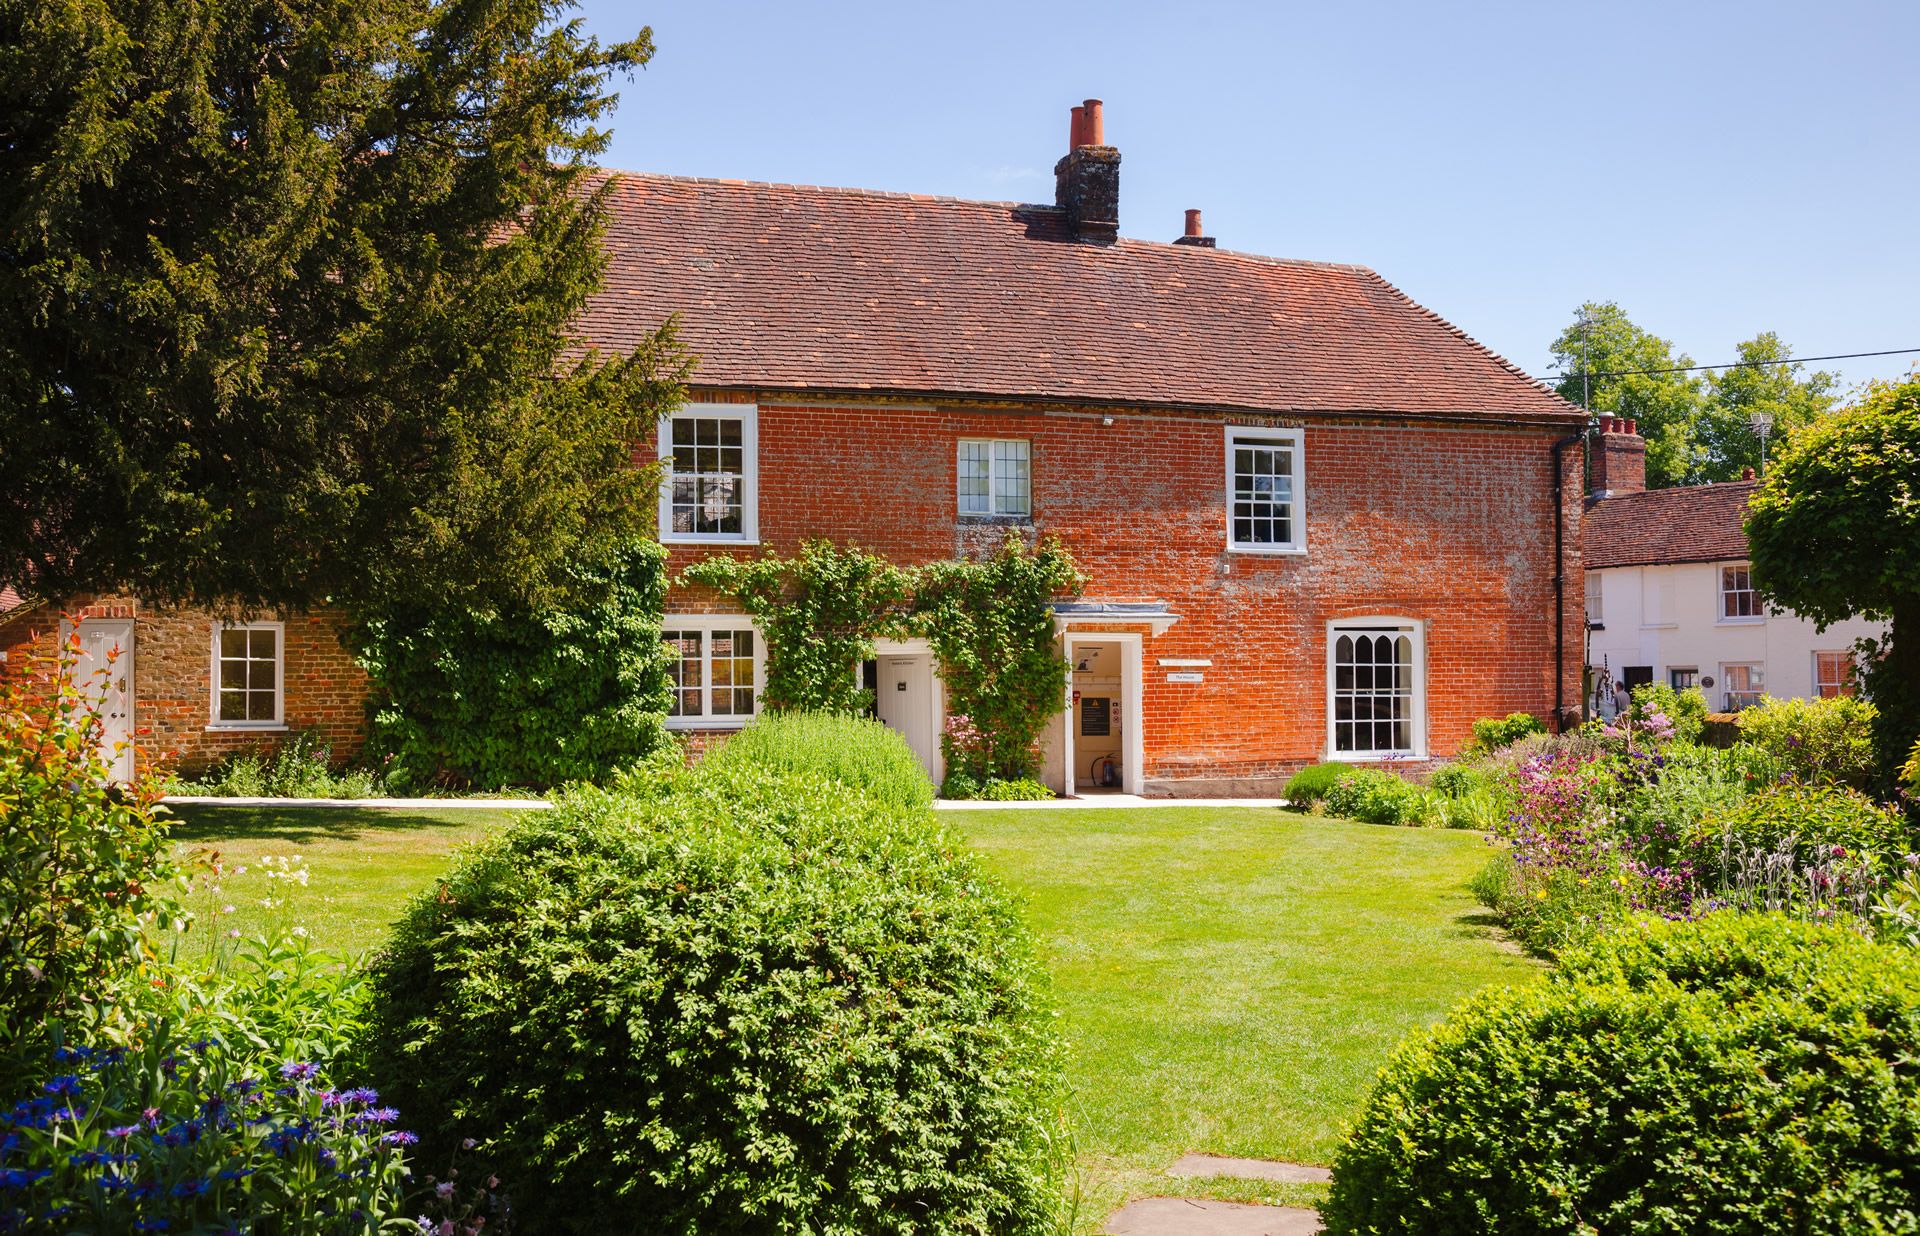 Jane Austen’s House at Chawton in Hampshire, England. An old fashioned brick house. 